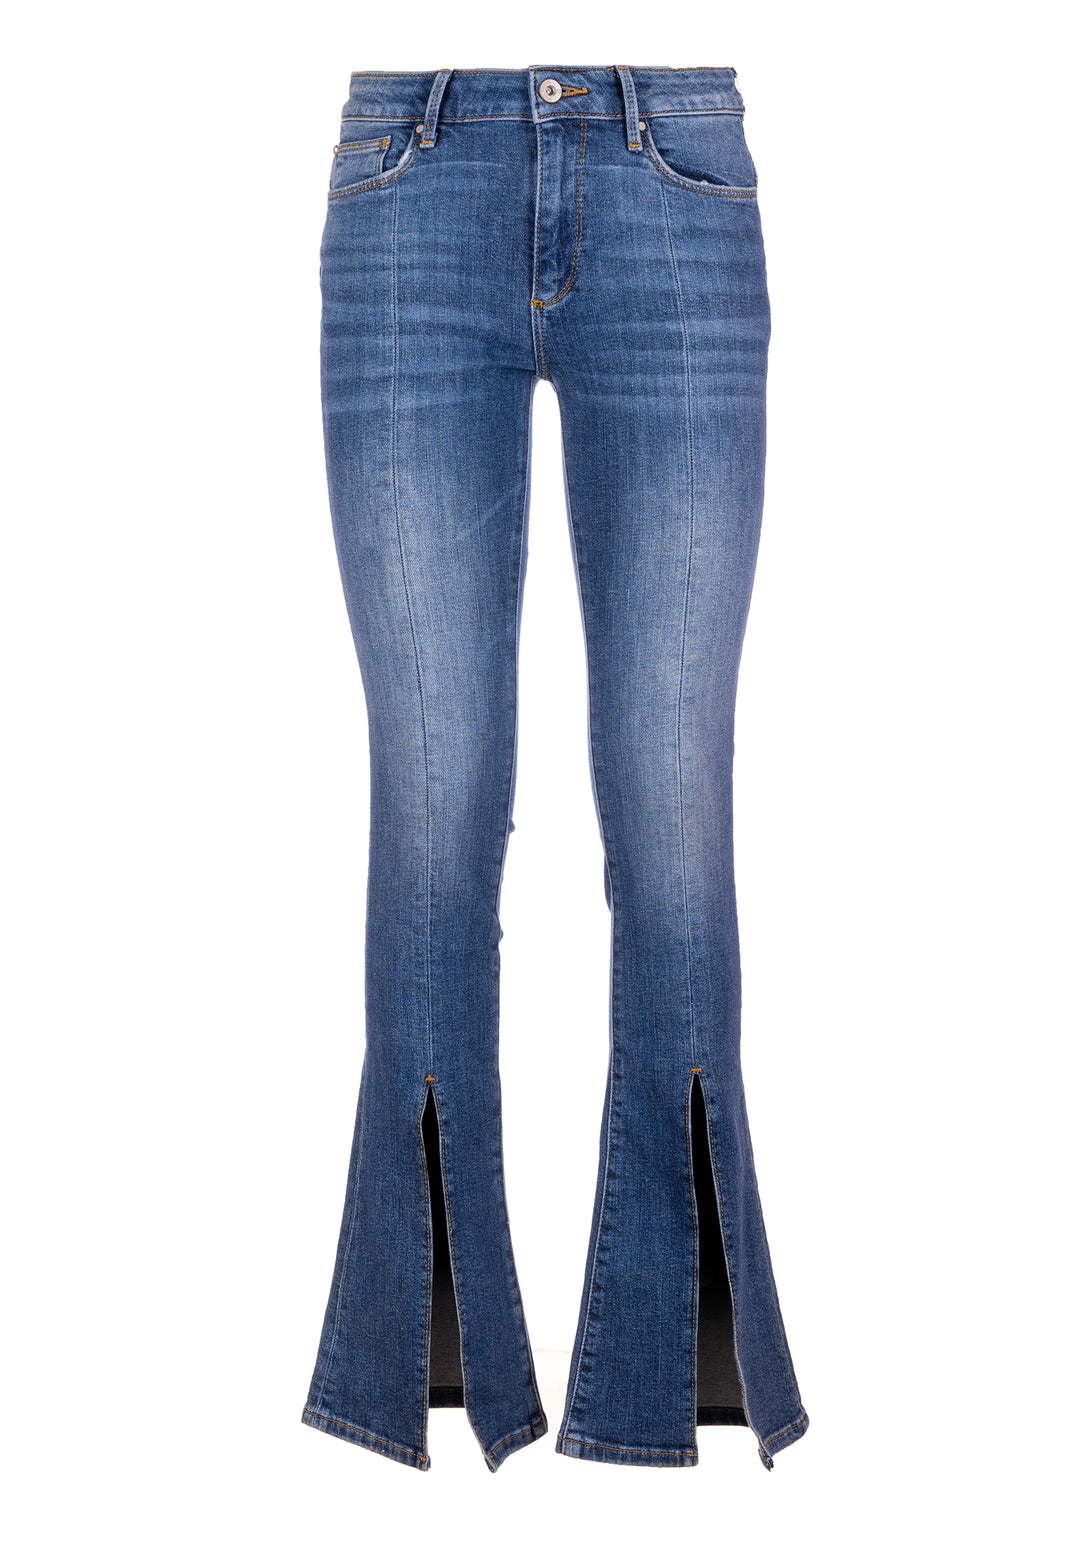 Jeans bootcut with push up effect made in denim with middle wash